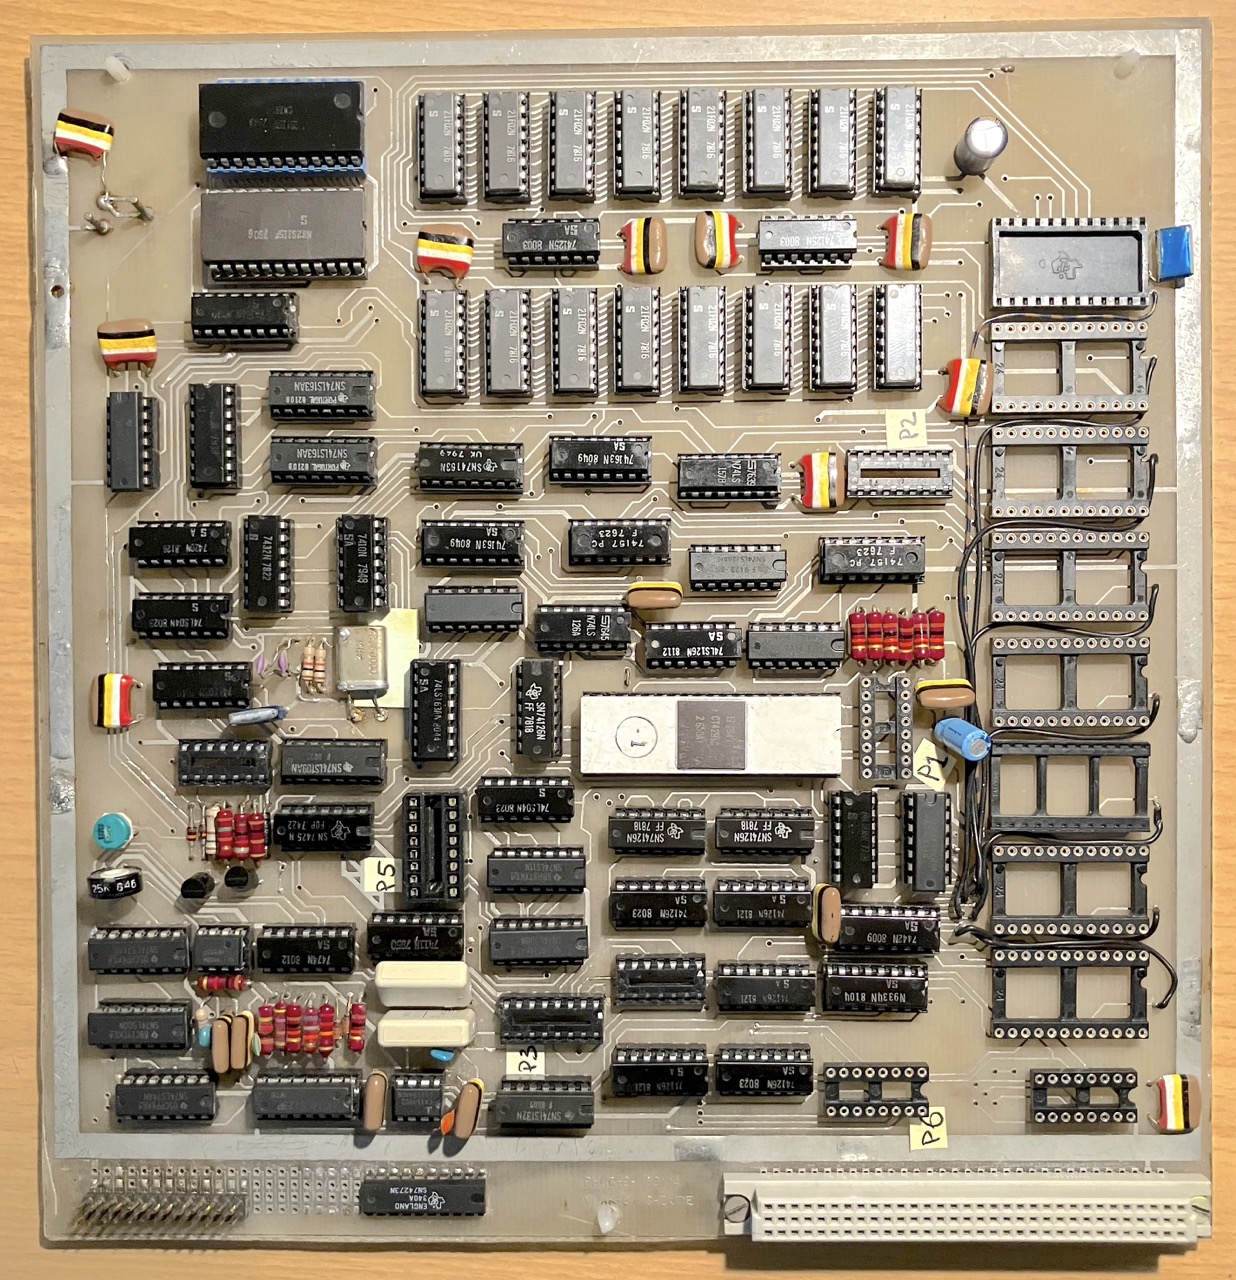 Component view of the P1 computer.